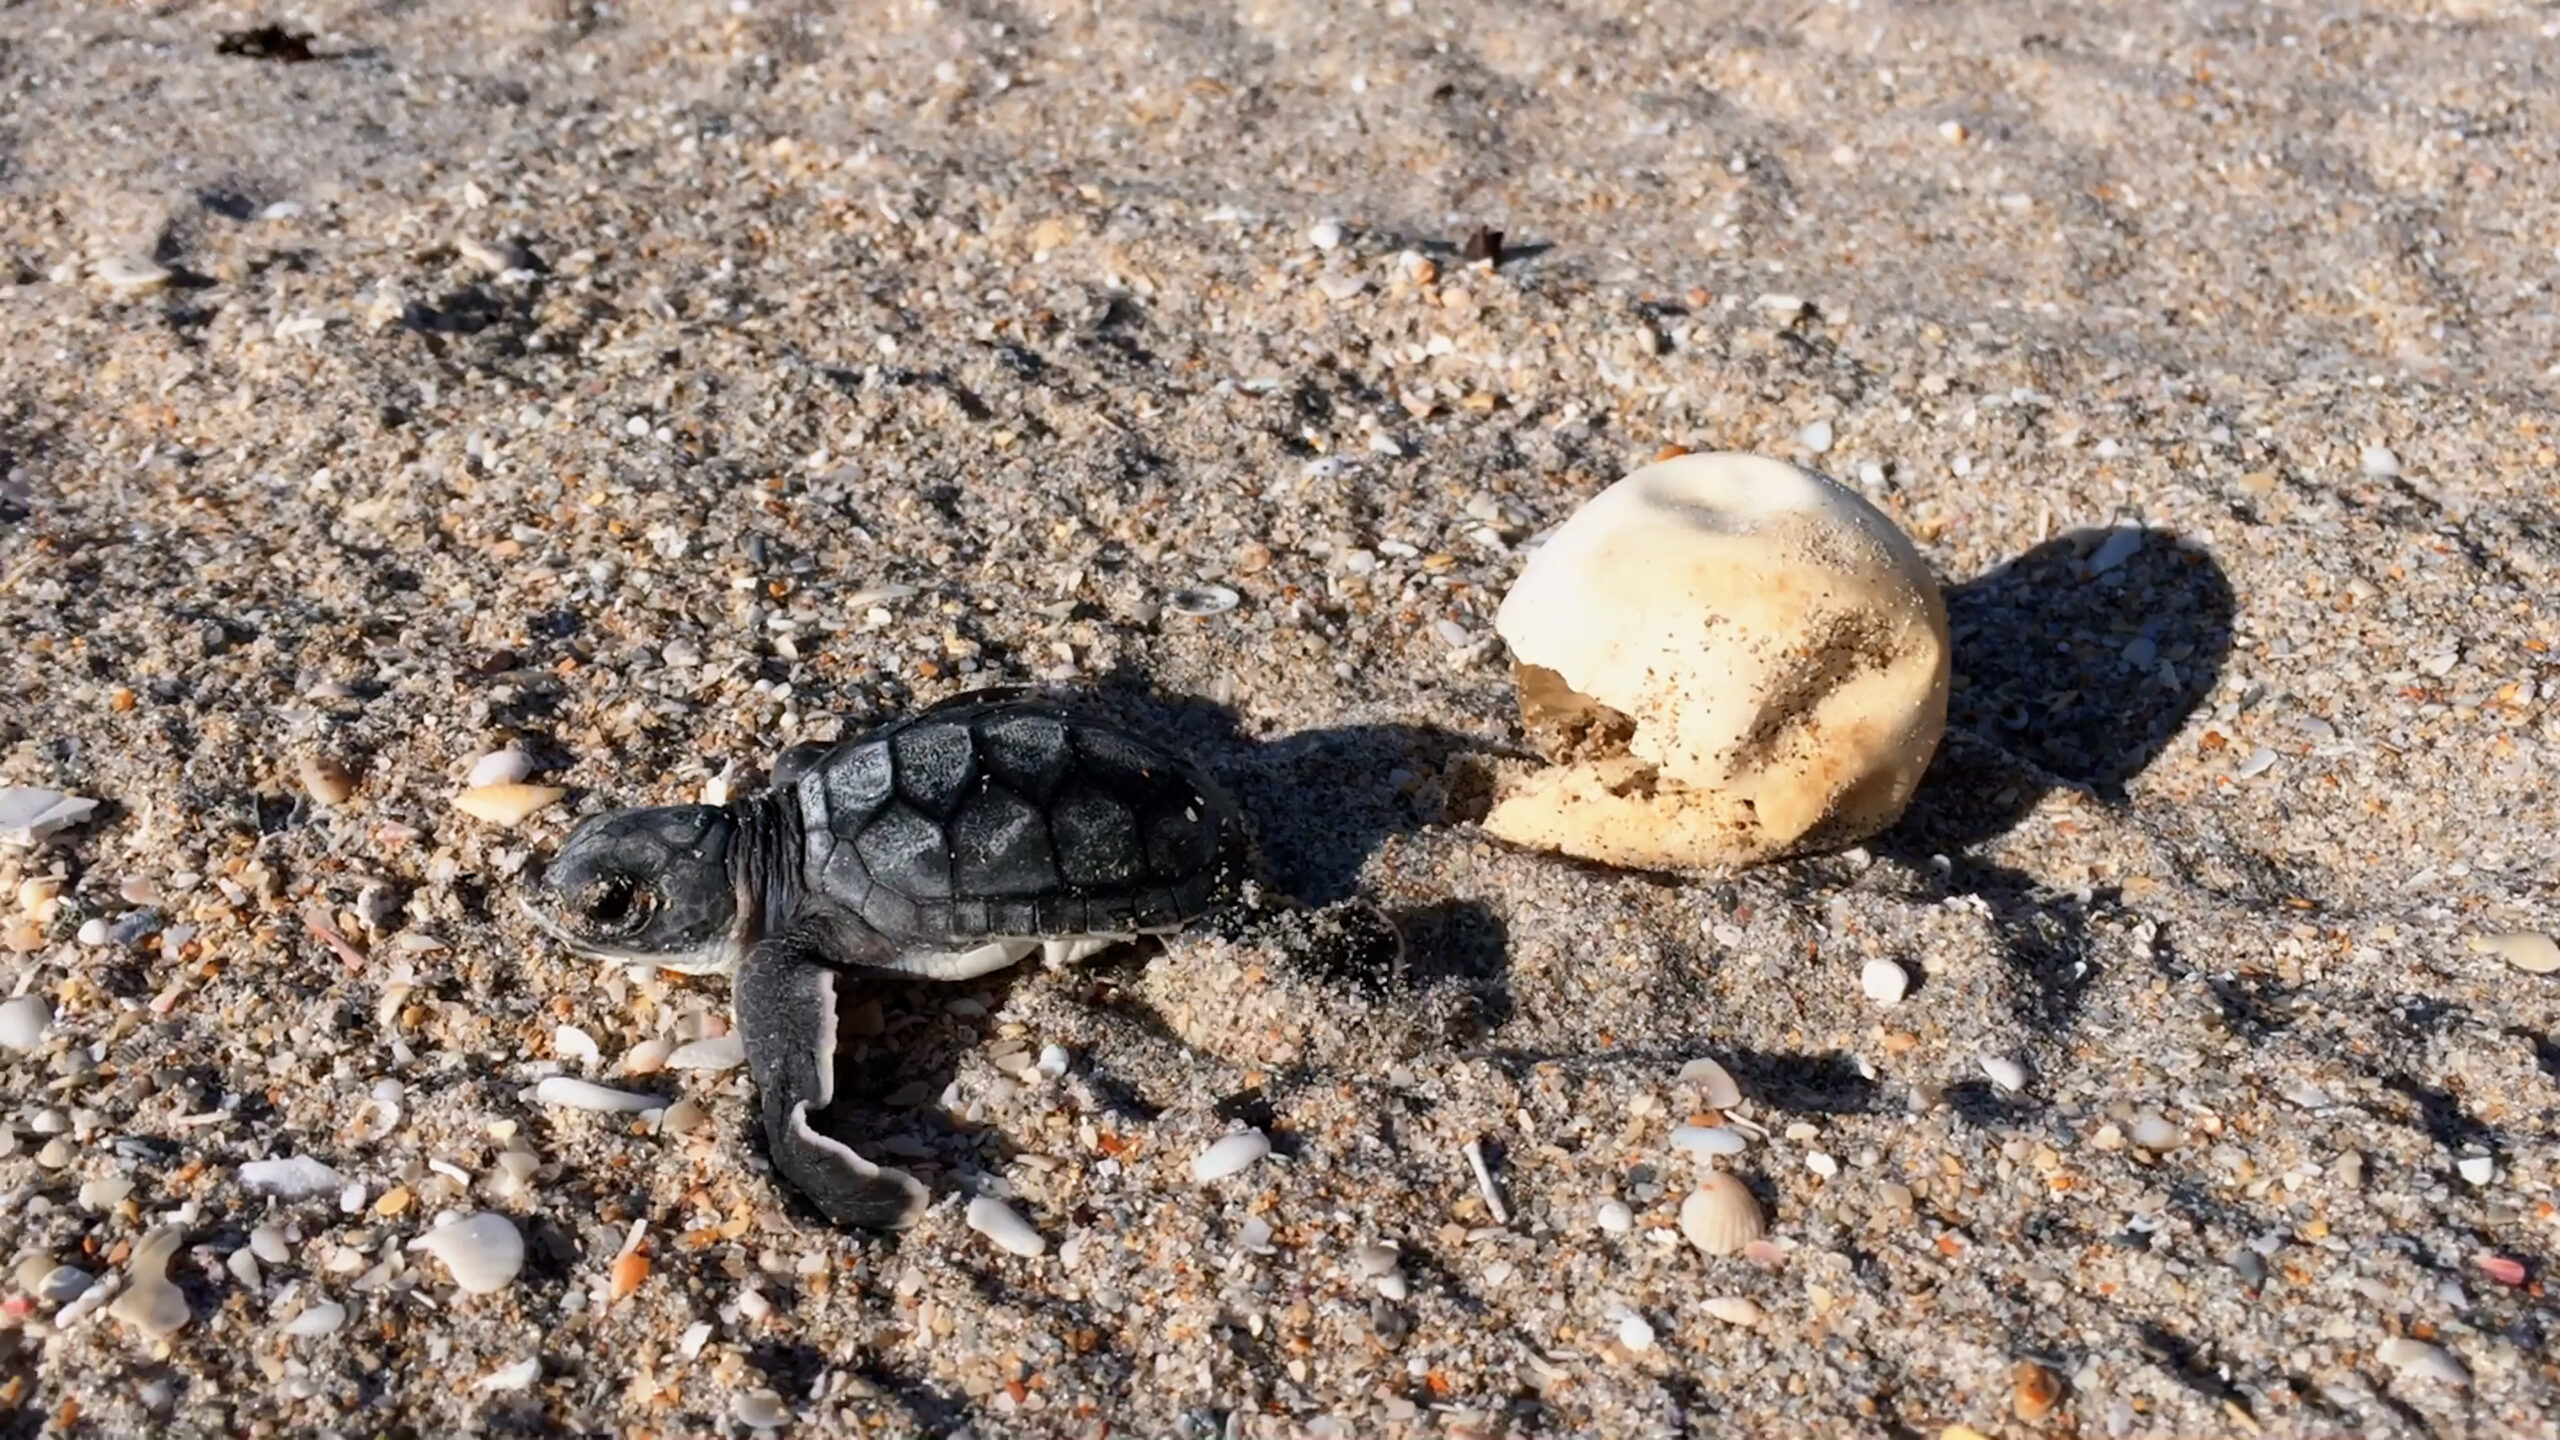 Sea turtle nests break records on US beaches, but global warming threatens their survival